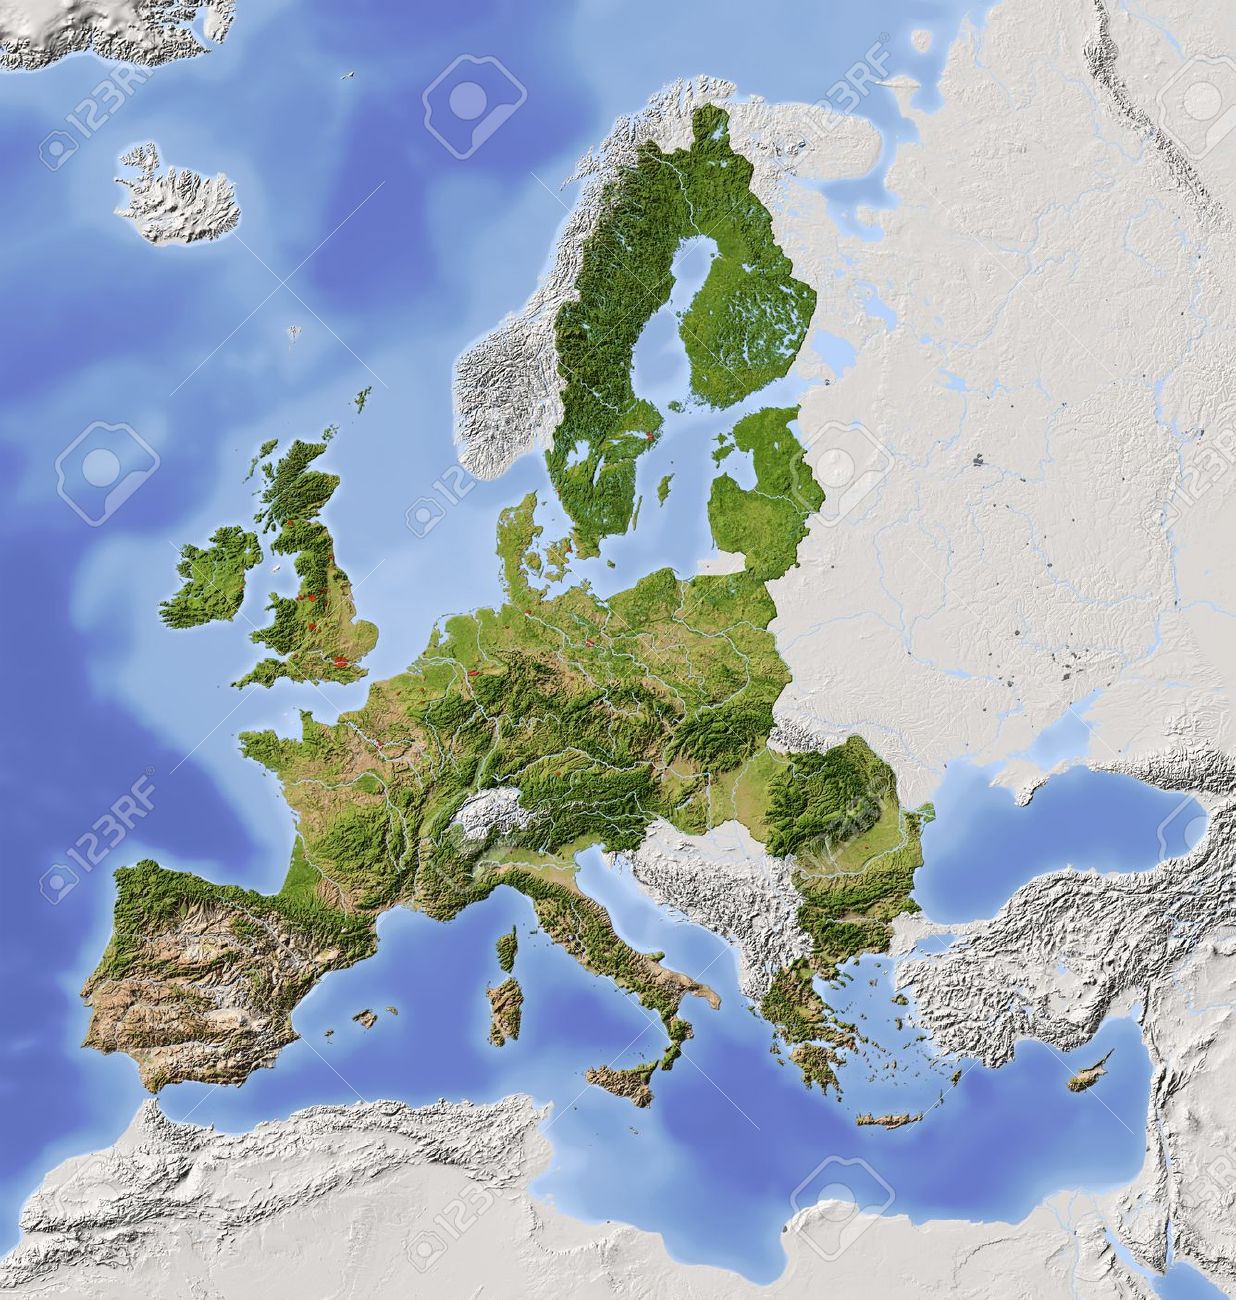 10768859-European-Union-Shaded-relief-map-with-major-urban-areas-Territory--Stock-Photo